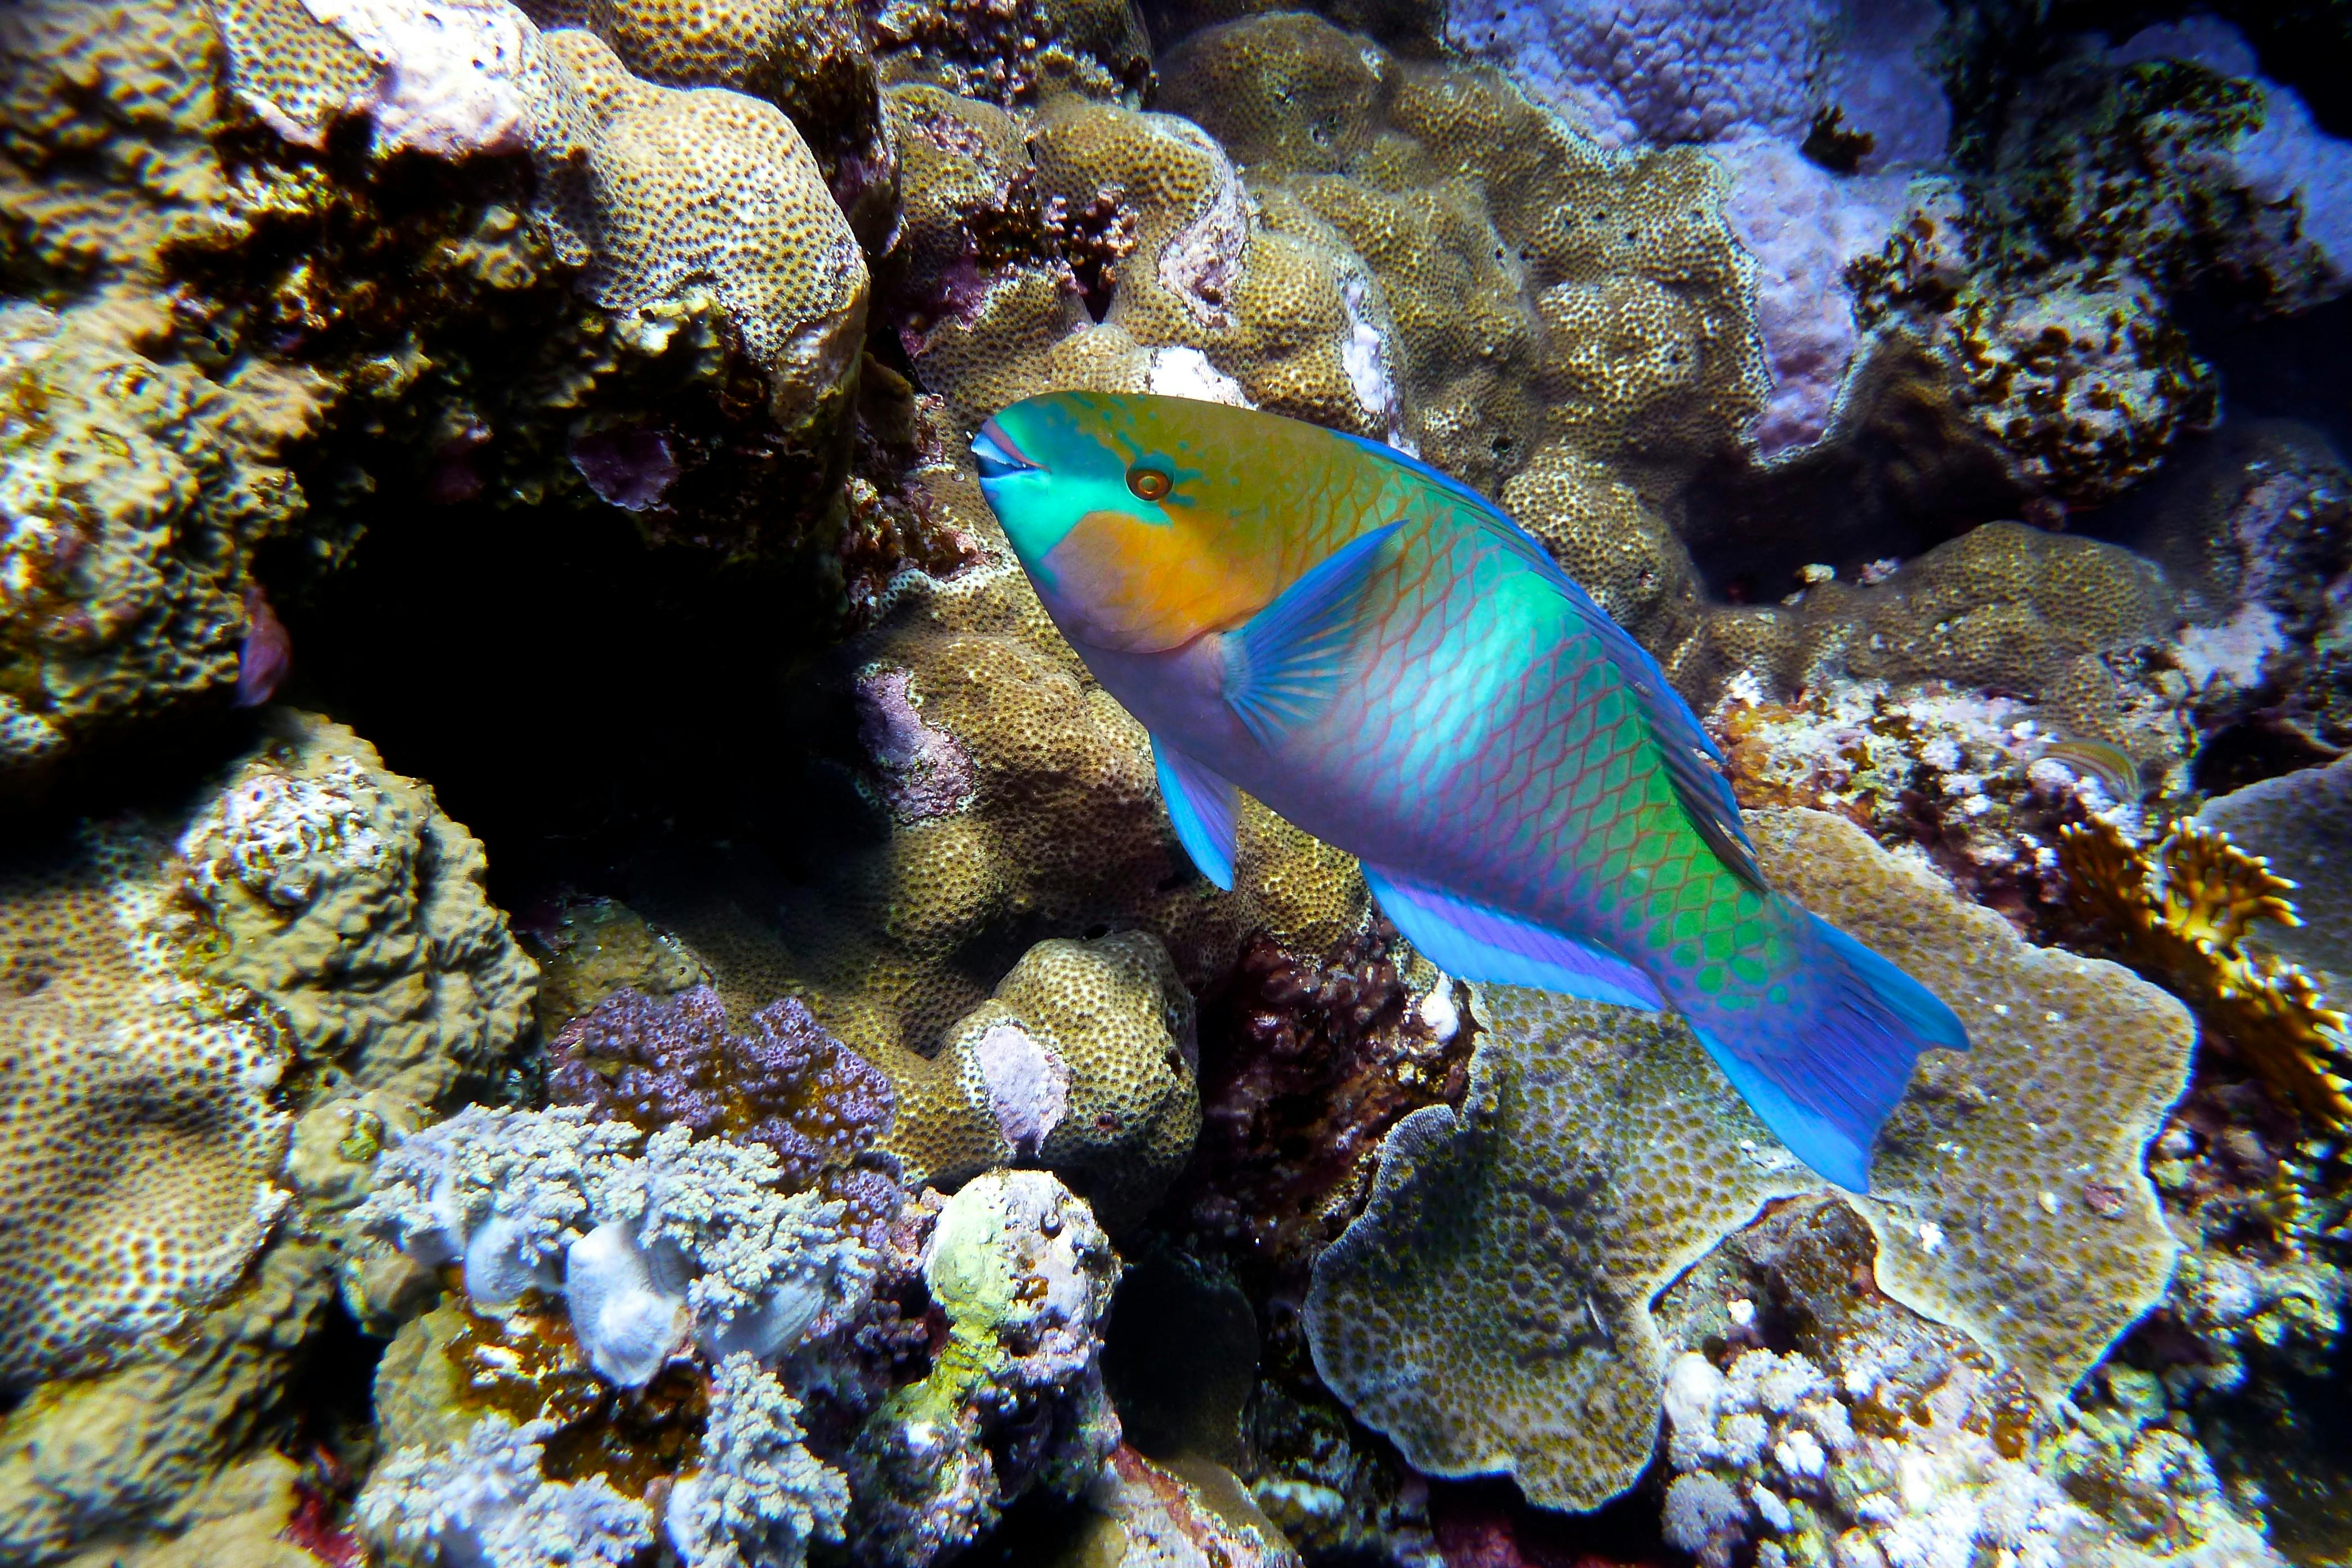  Reef Fish Conservation